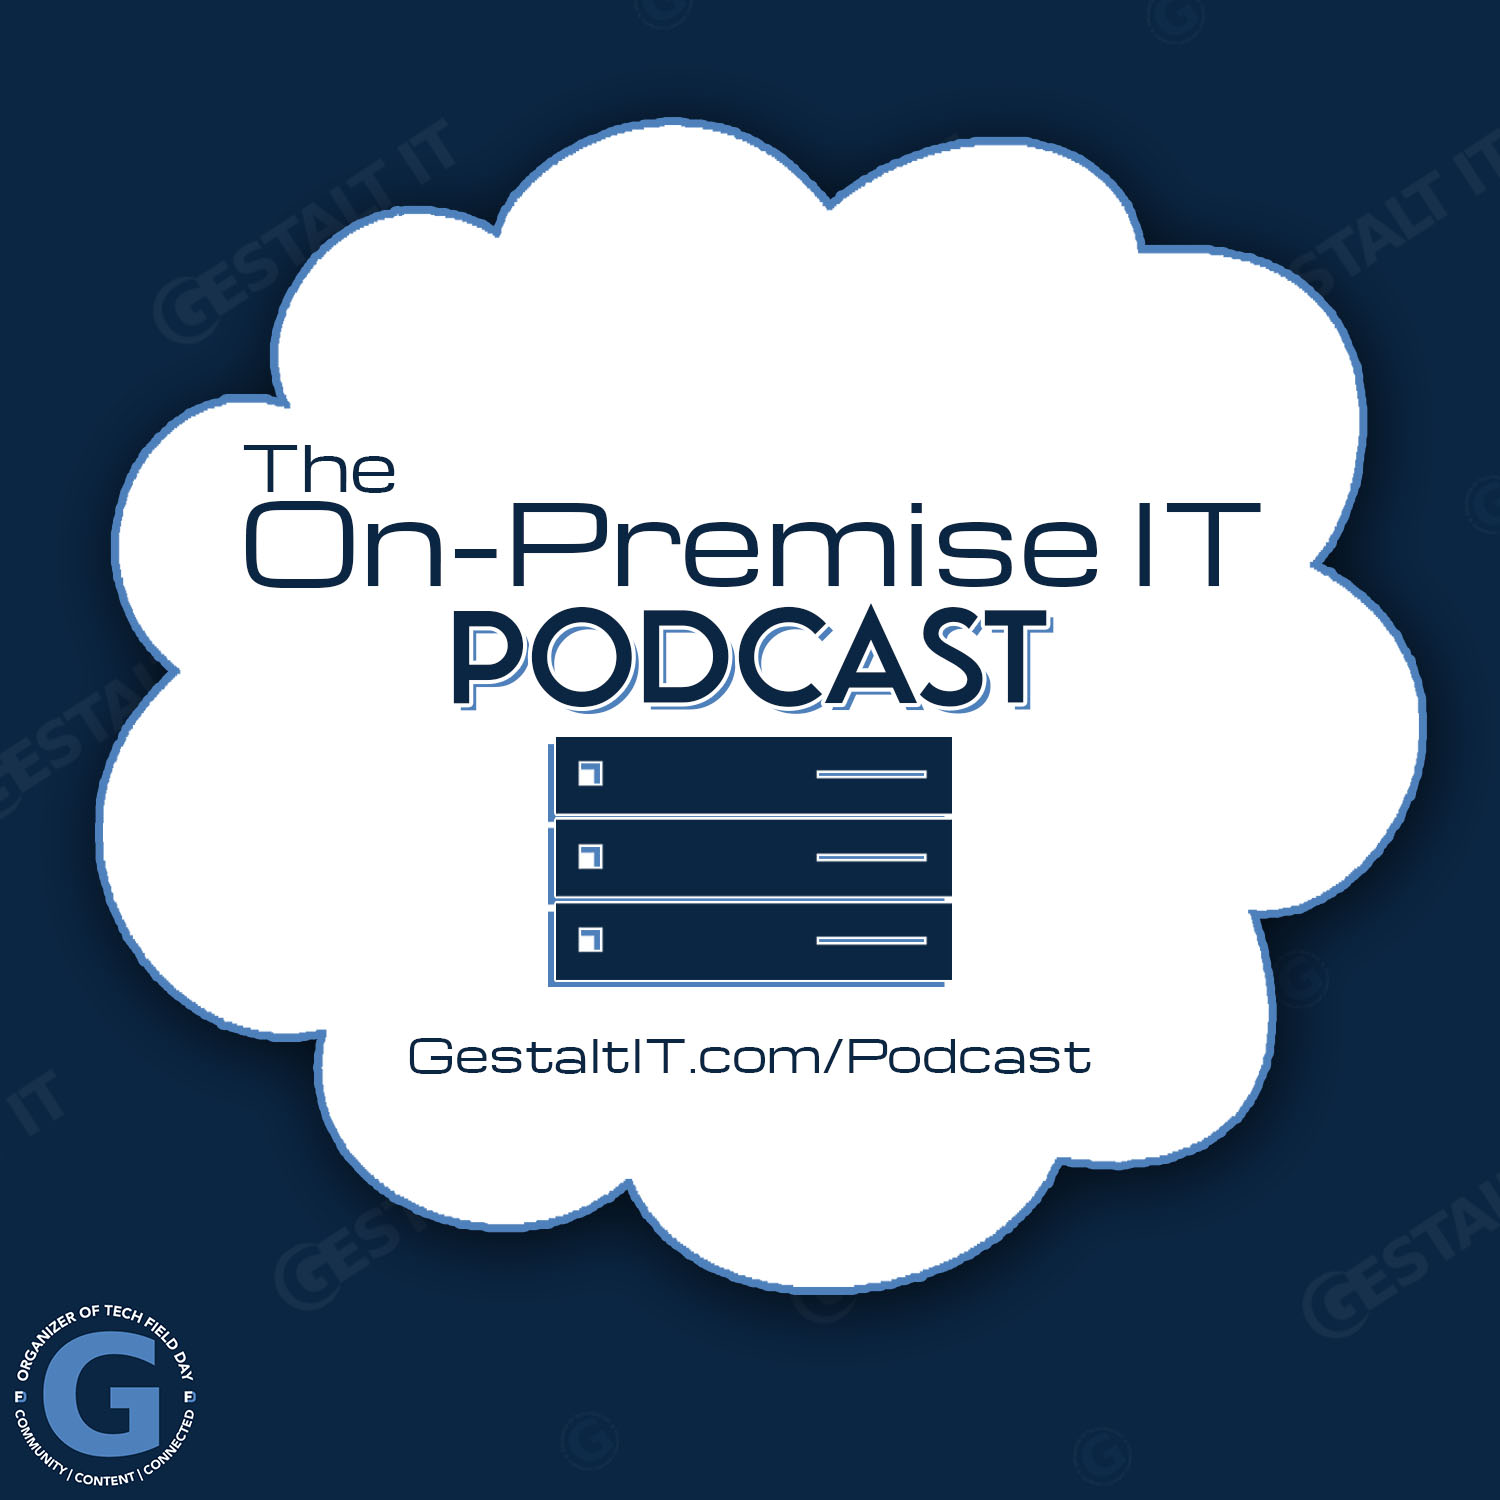 The On-Premise IT Podcast